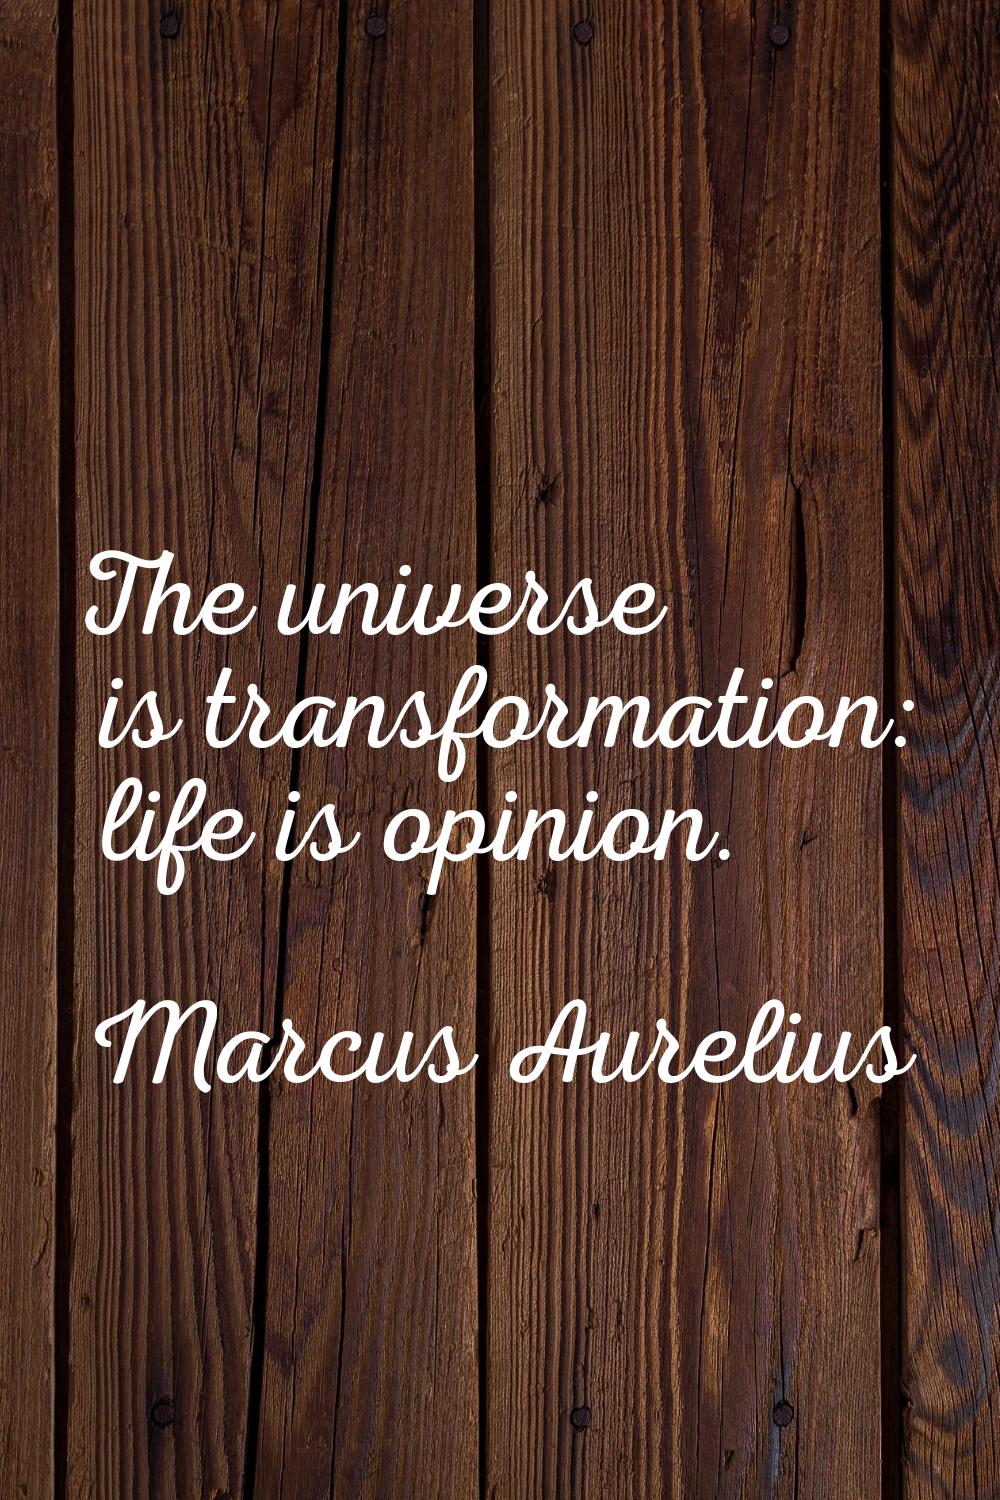 The universe is transformation: life is opinion.